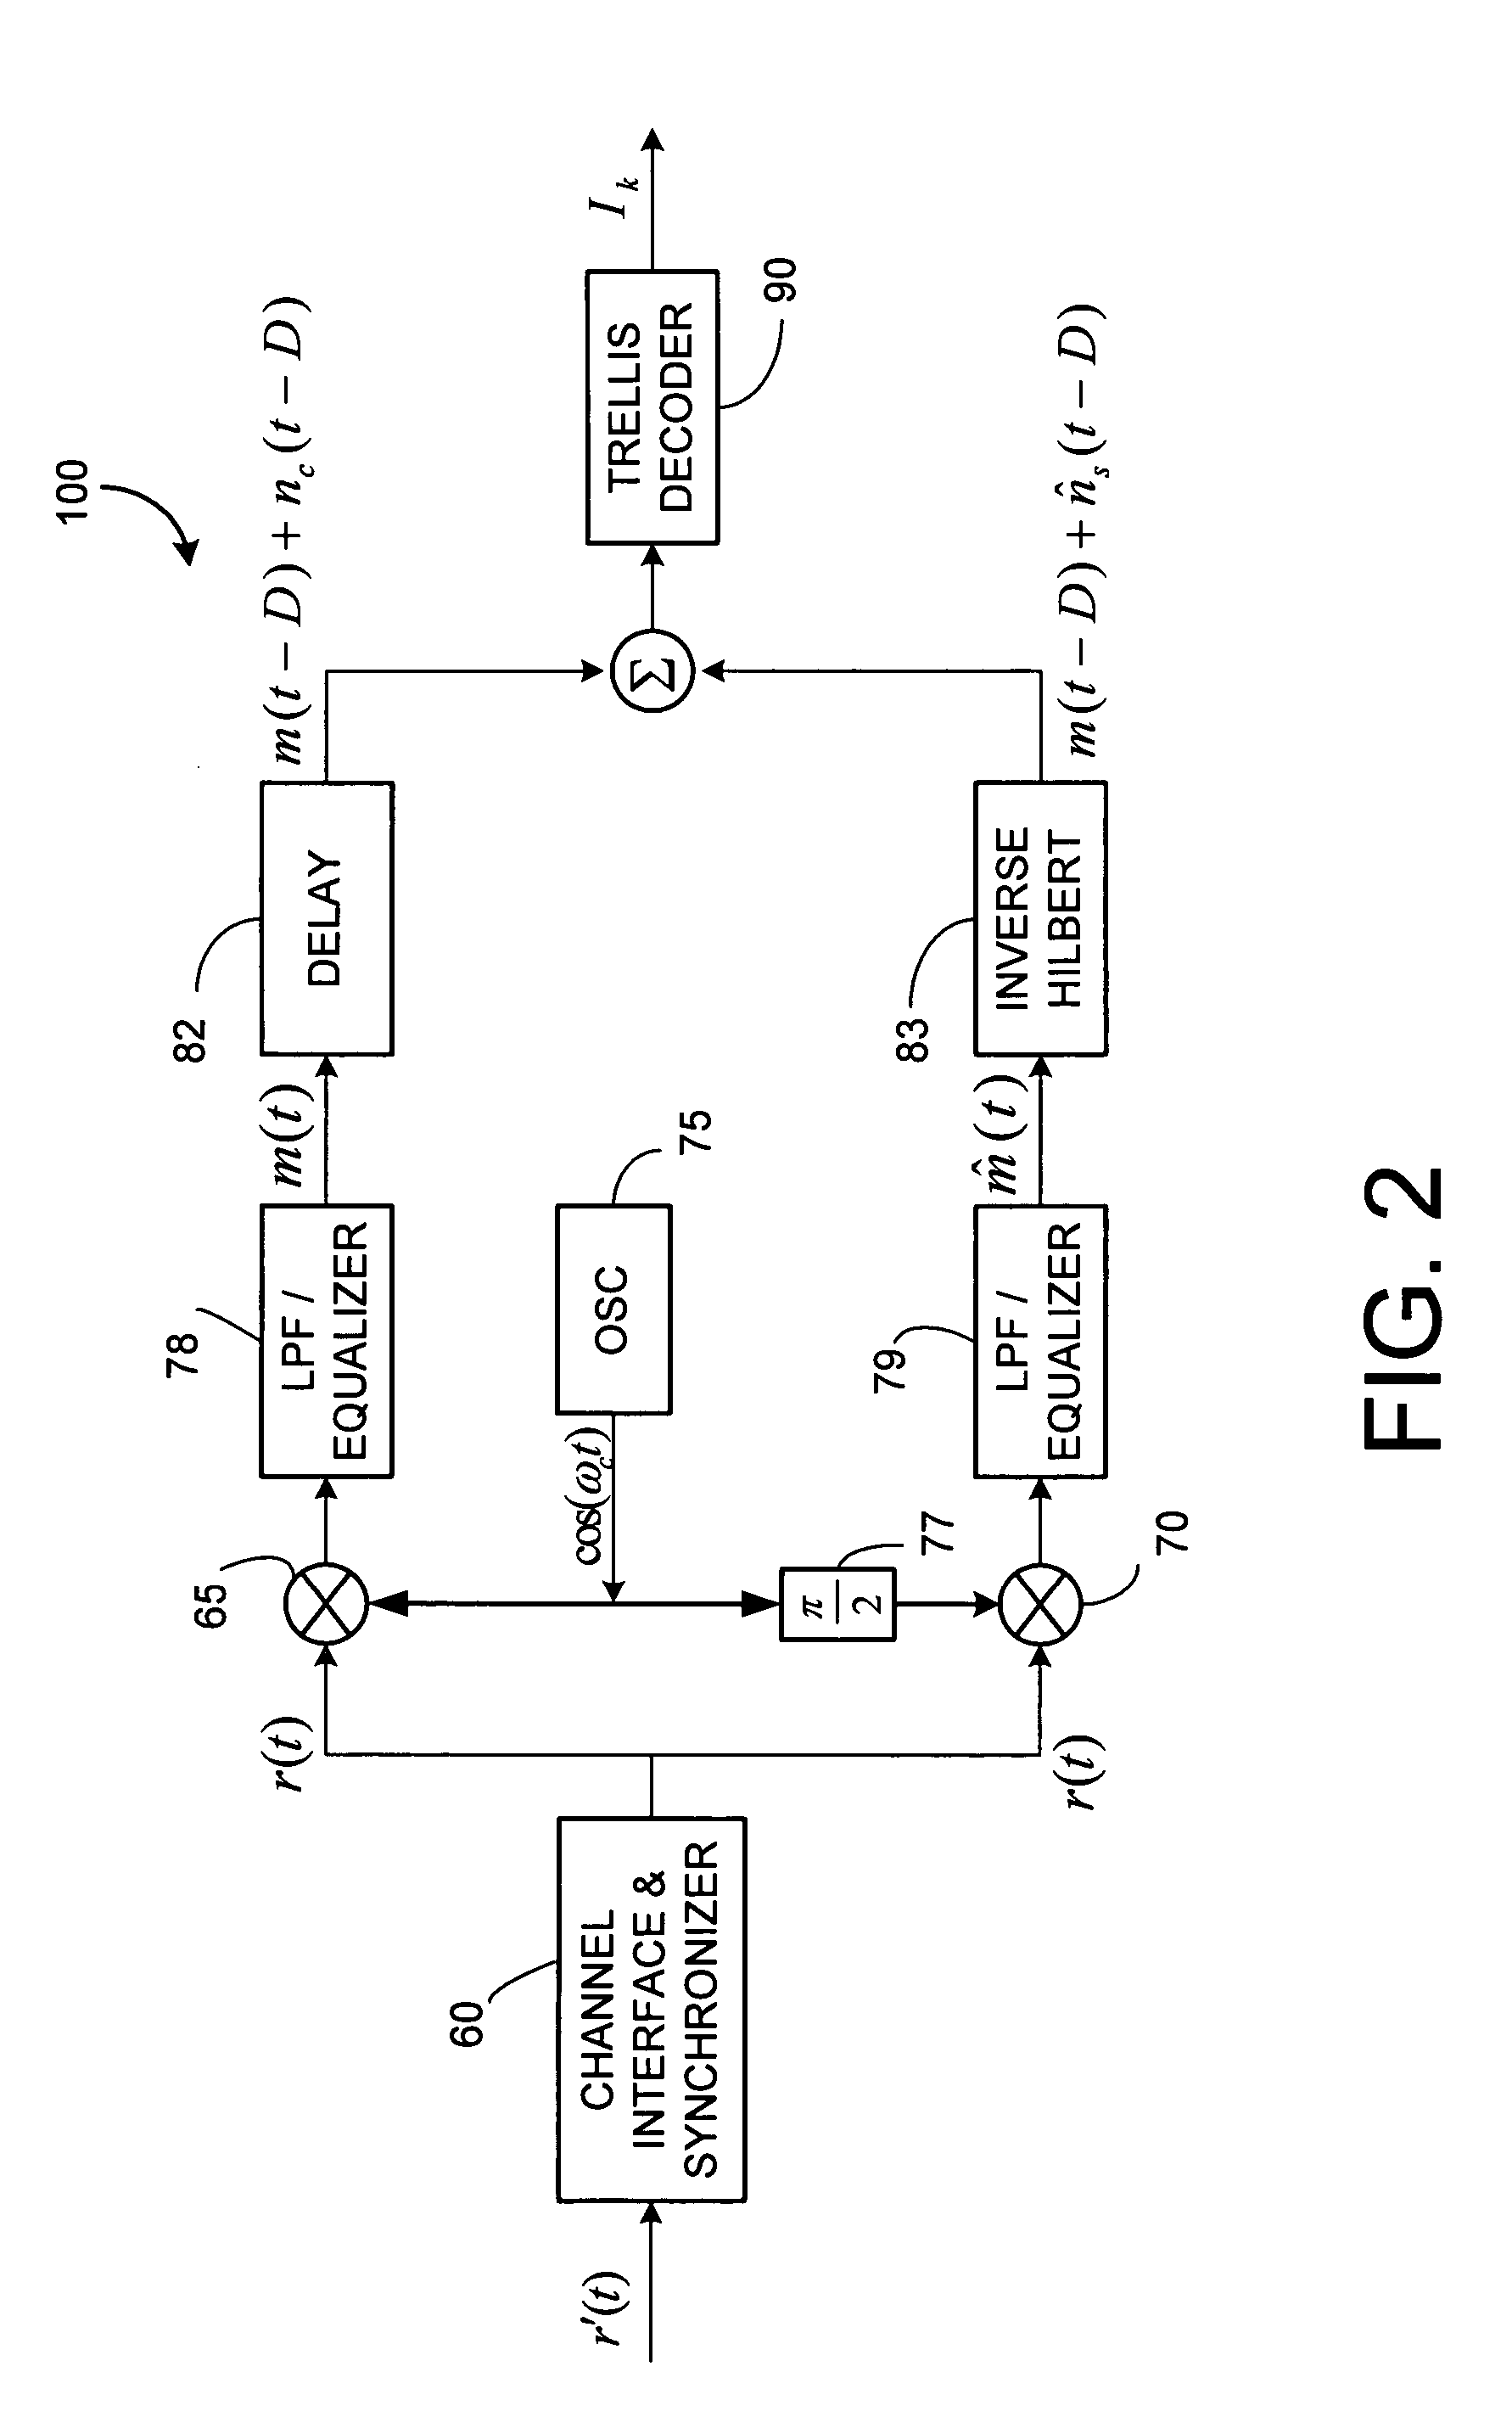 Single sideband and quadrature multiplexed continuous phase modulation